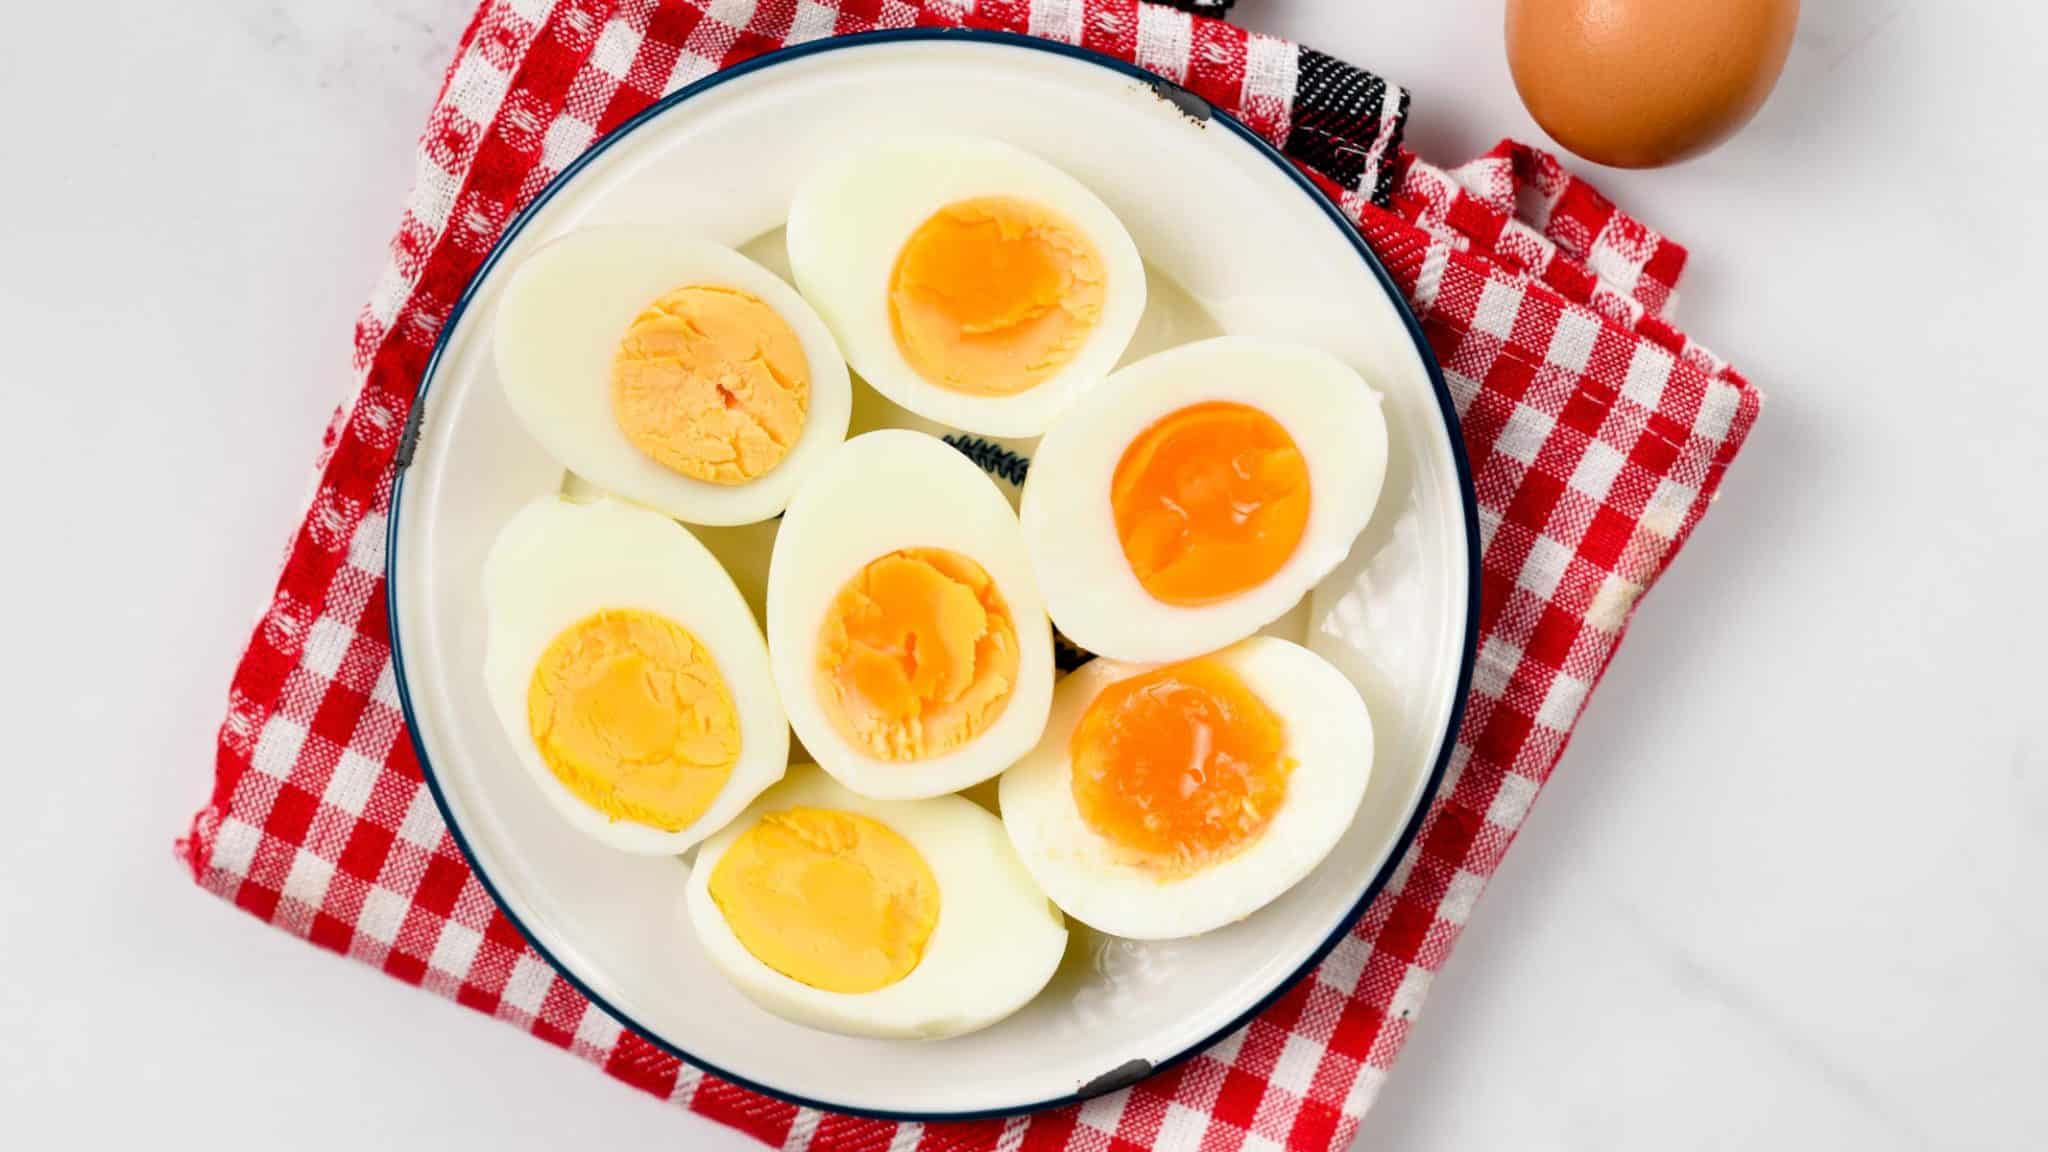 Air Fryer Hard Boiled Eggs — Incredibly Easy to Peel! - Syd.Nord